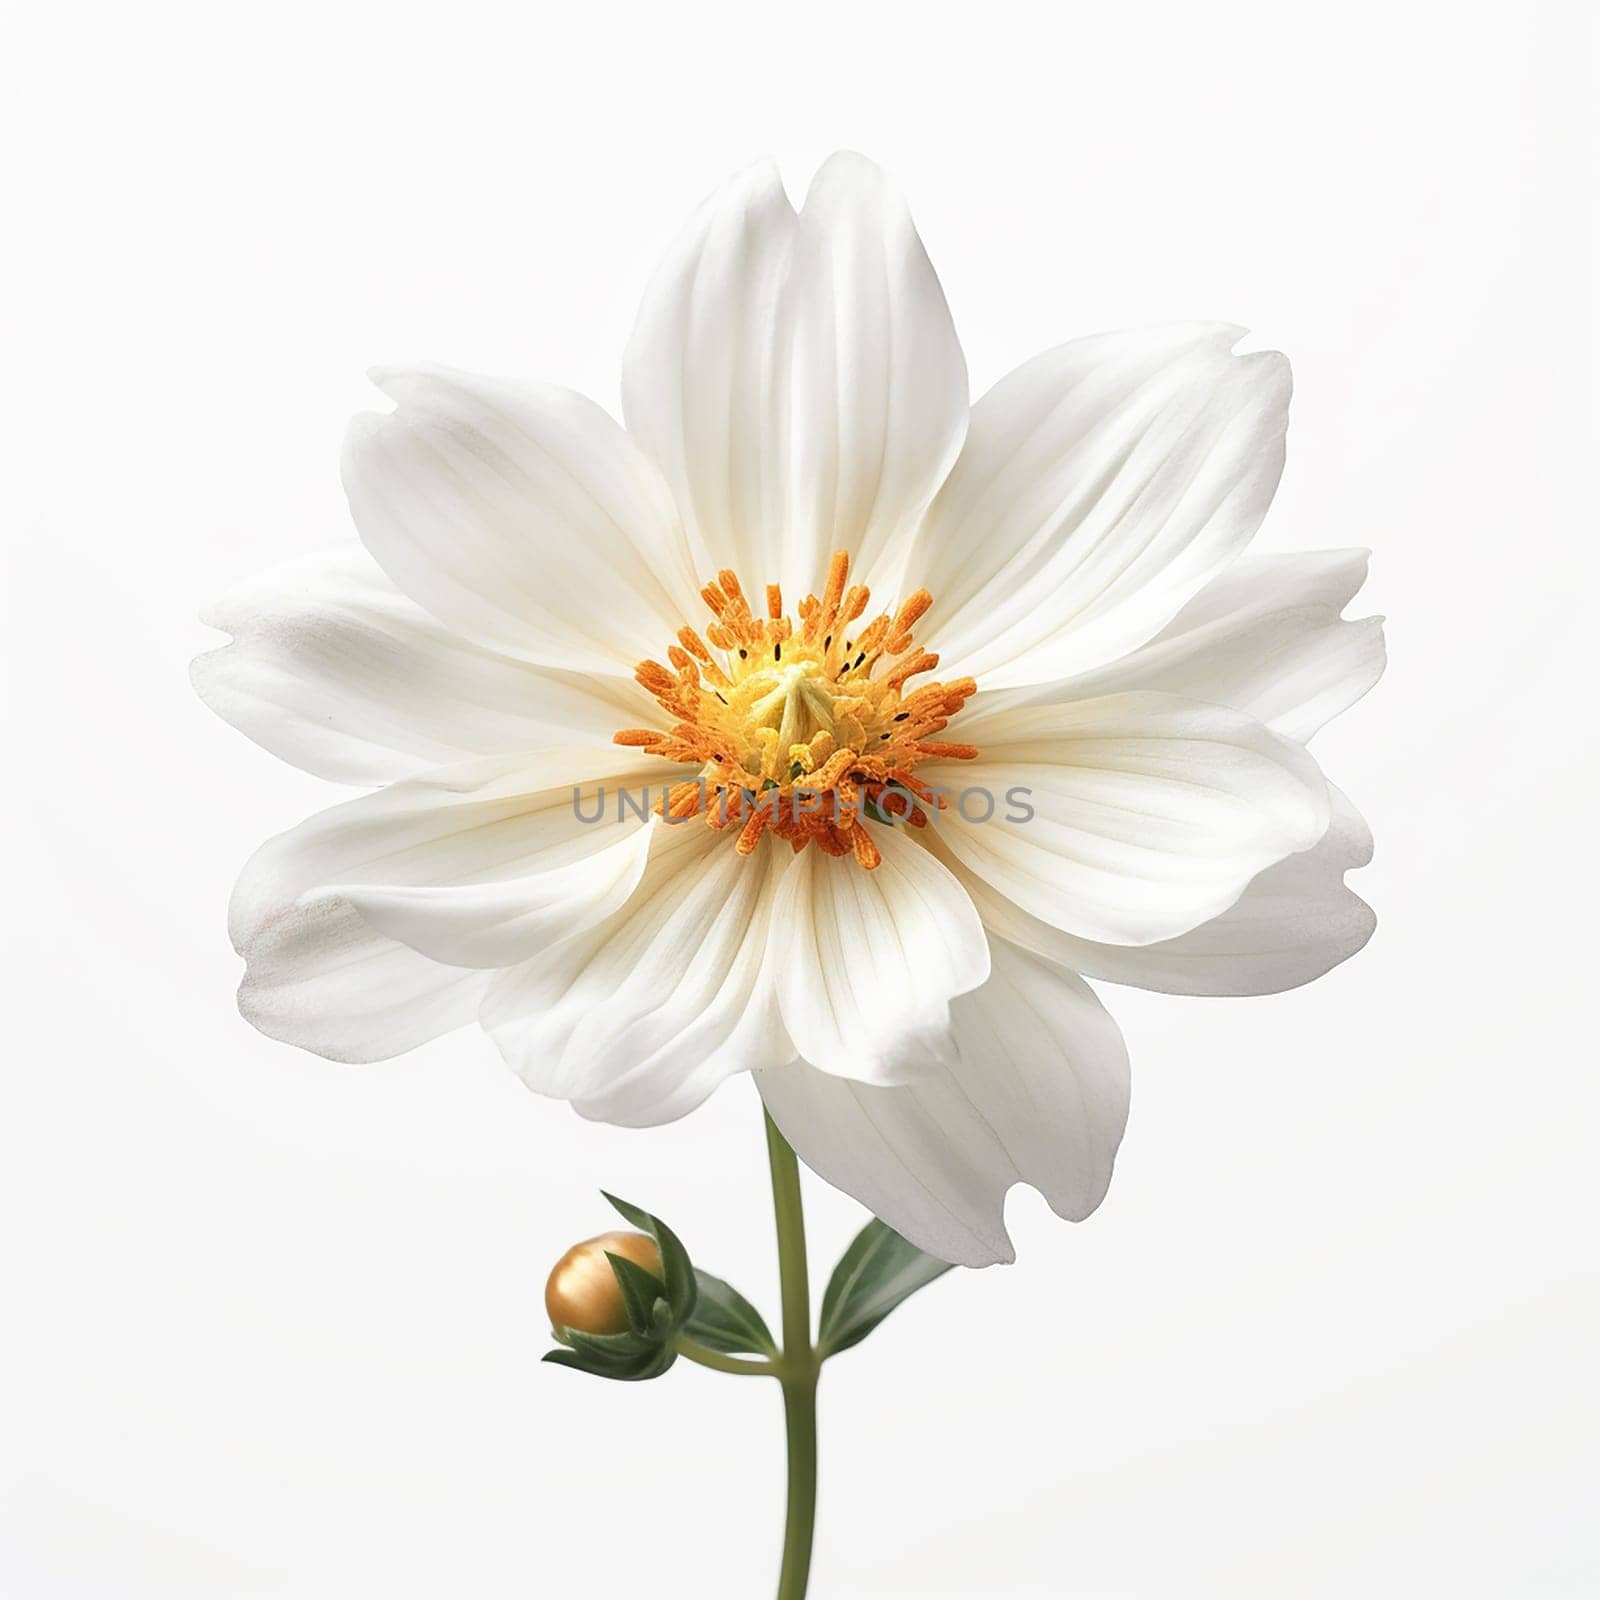 A single white flower with yellow stamens against a plain background.